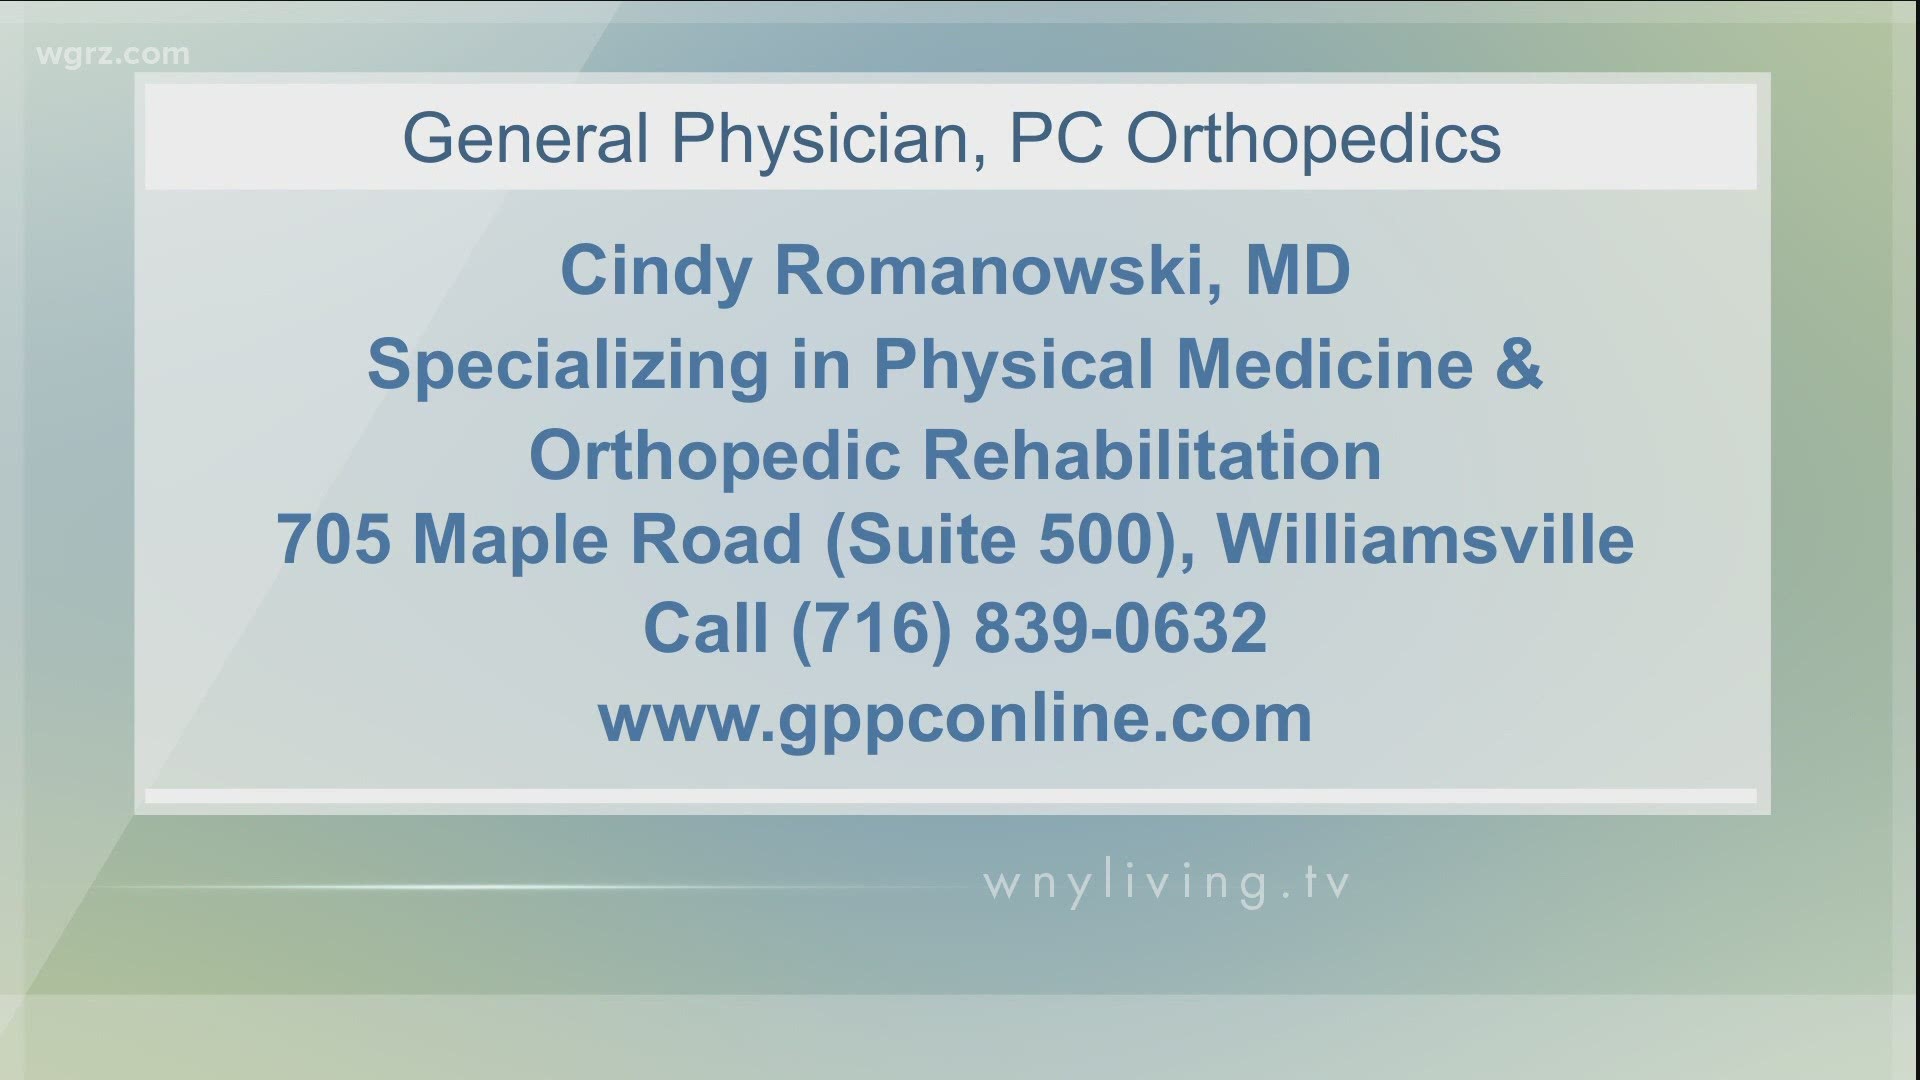 WNY Living - April 24 - General Physician, PC (THIS VIDEO IS SPONSORED BY GENERAL PHYSICIAN, PC)